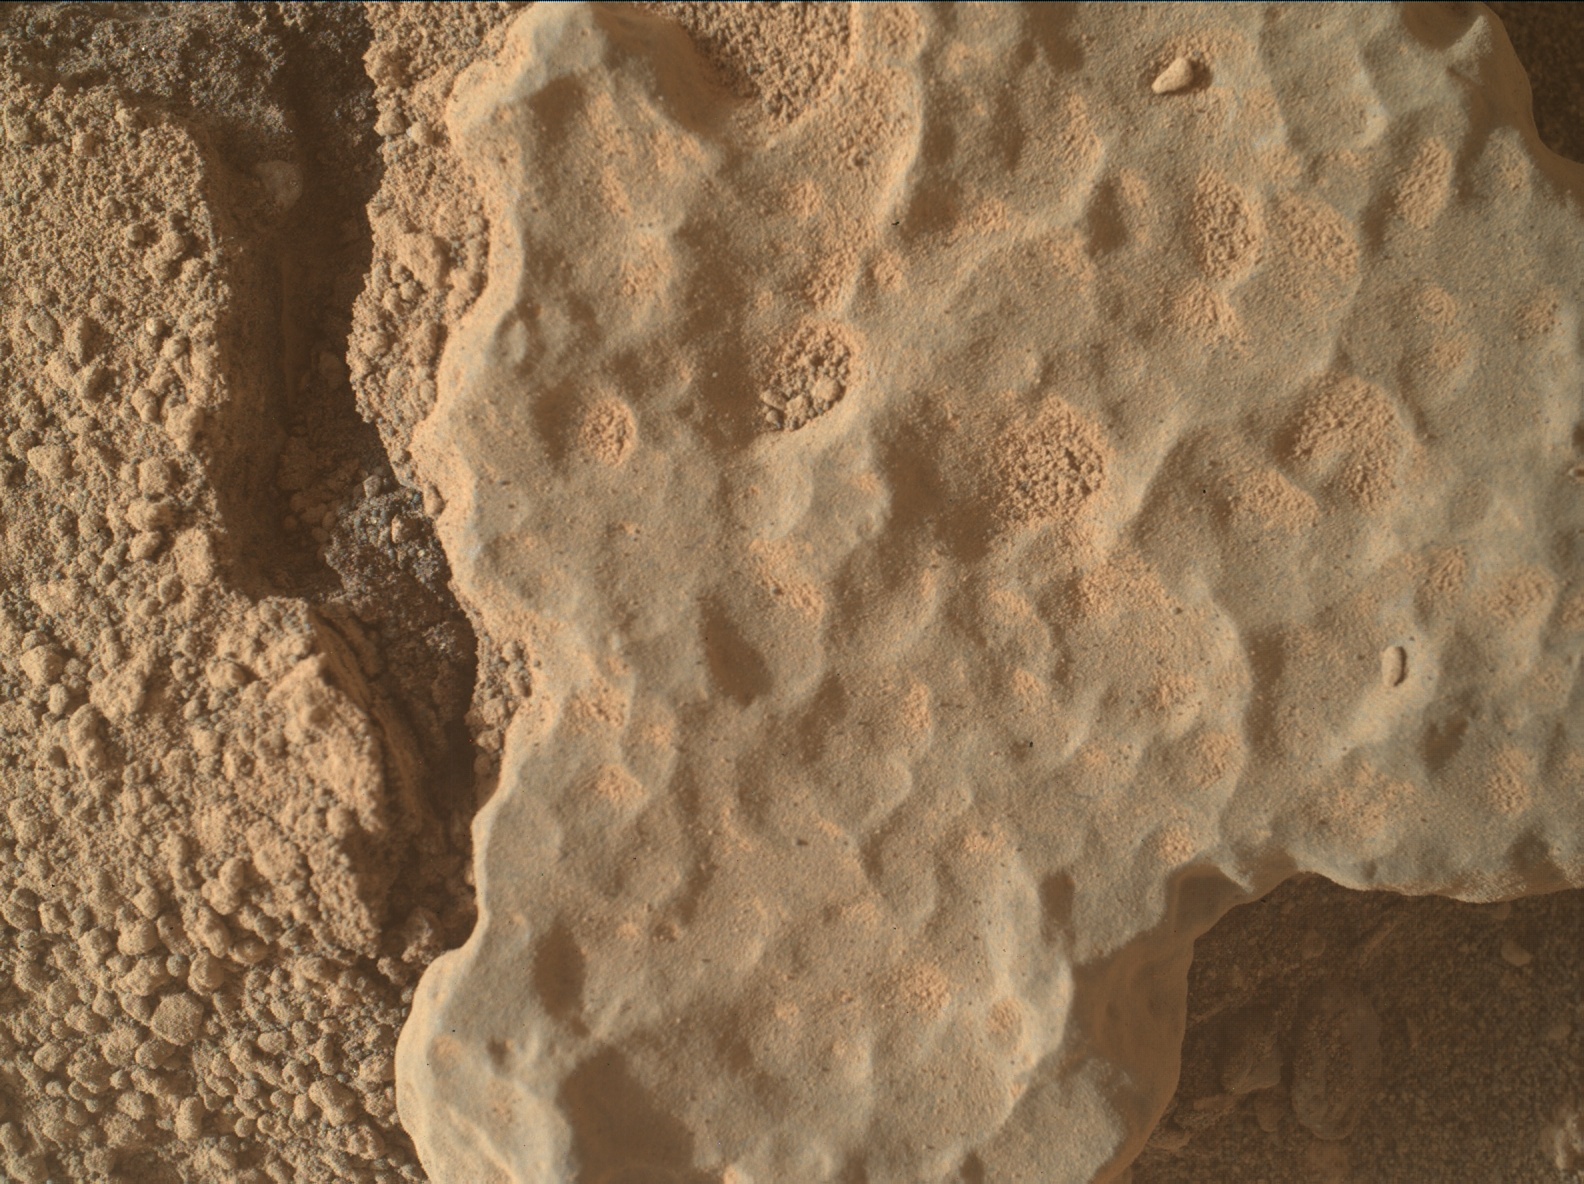 Nasa's Mars rover Curiosity acquired this image using its Mars Hand Lens Imager (MAHLI) on Sol 3702